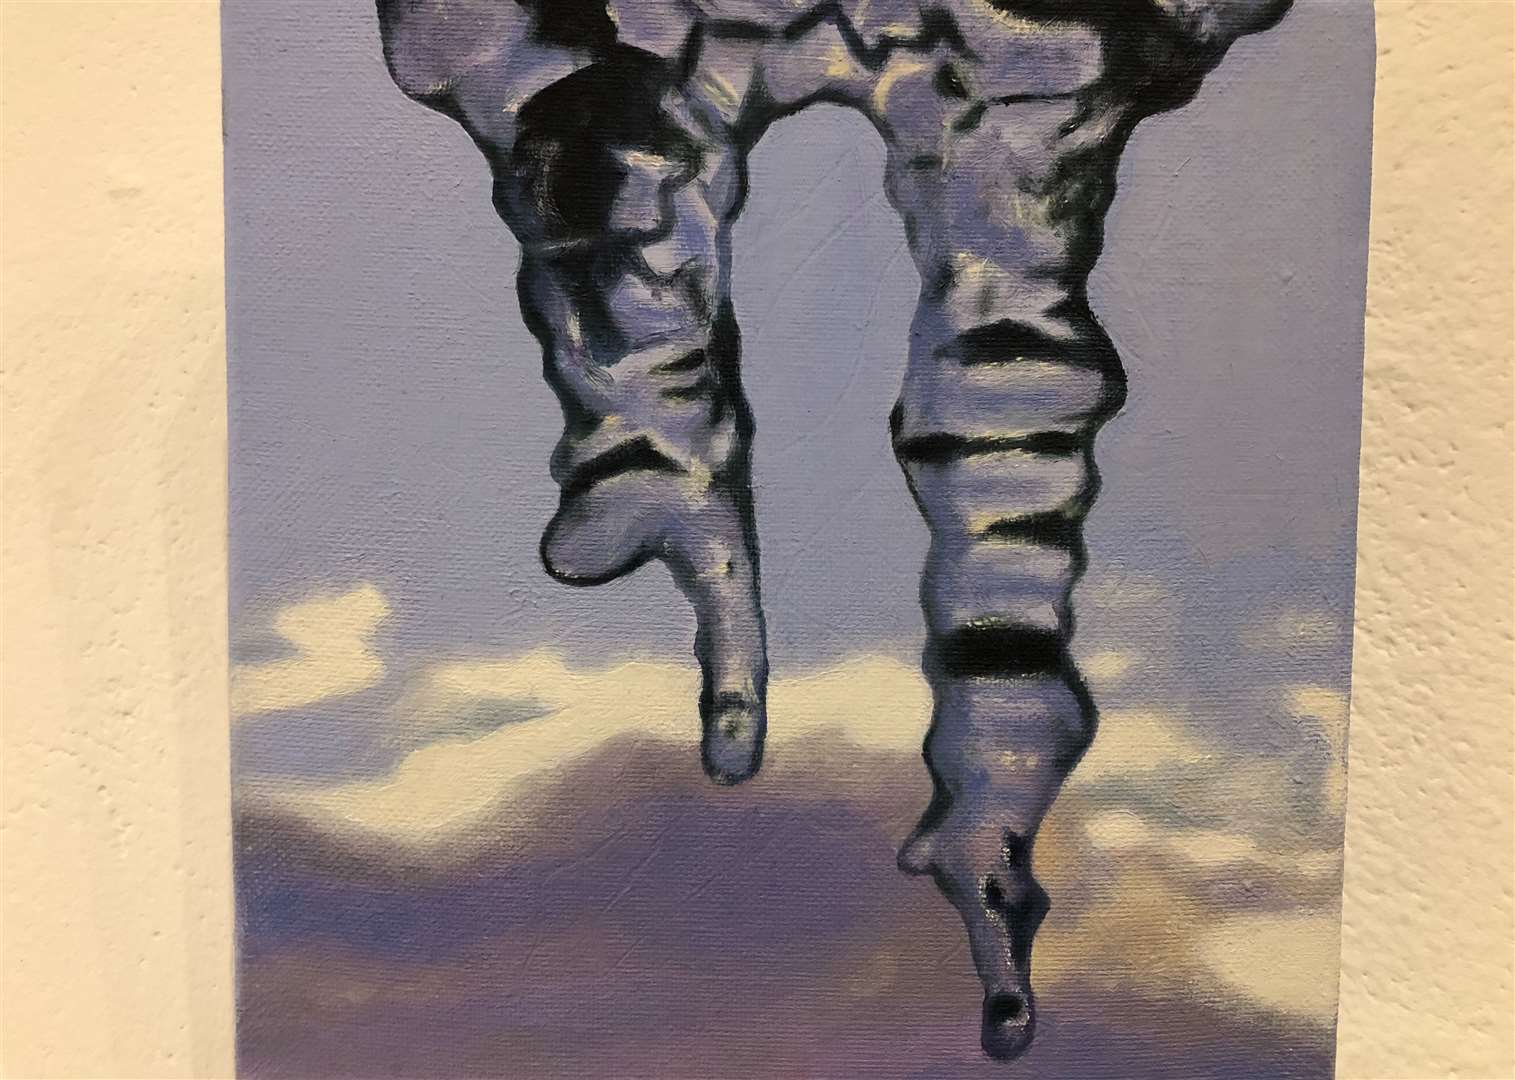 Icicles by Cathy Green, featured in the exhibition